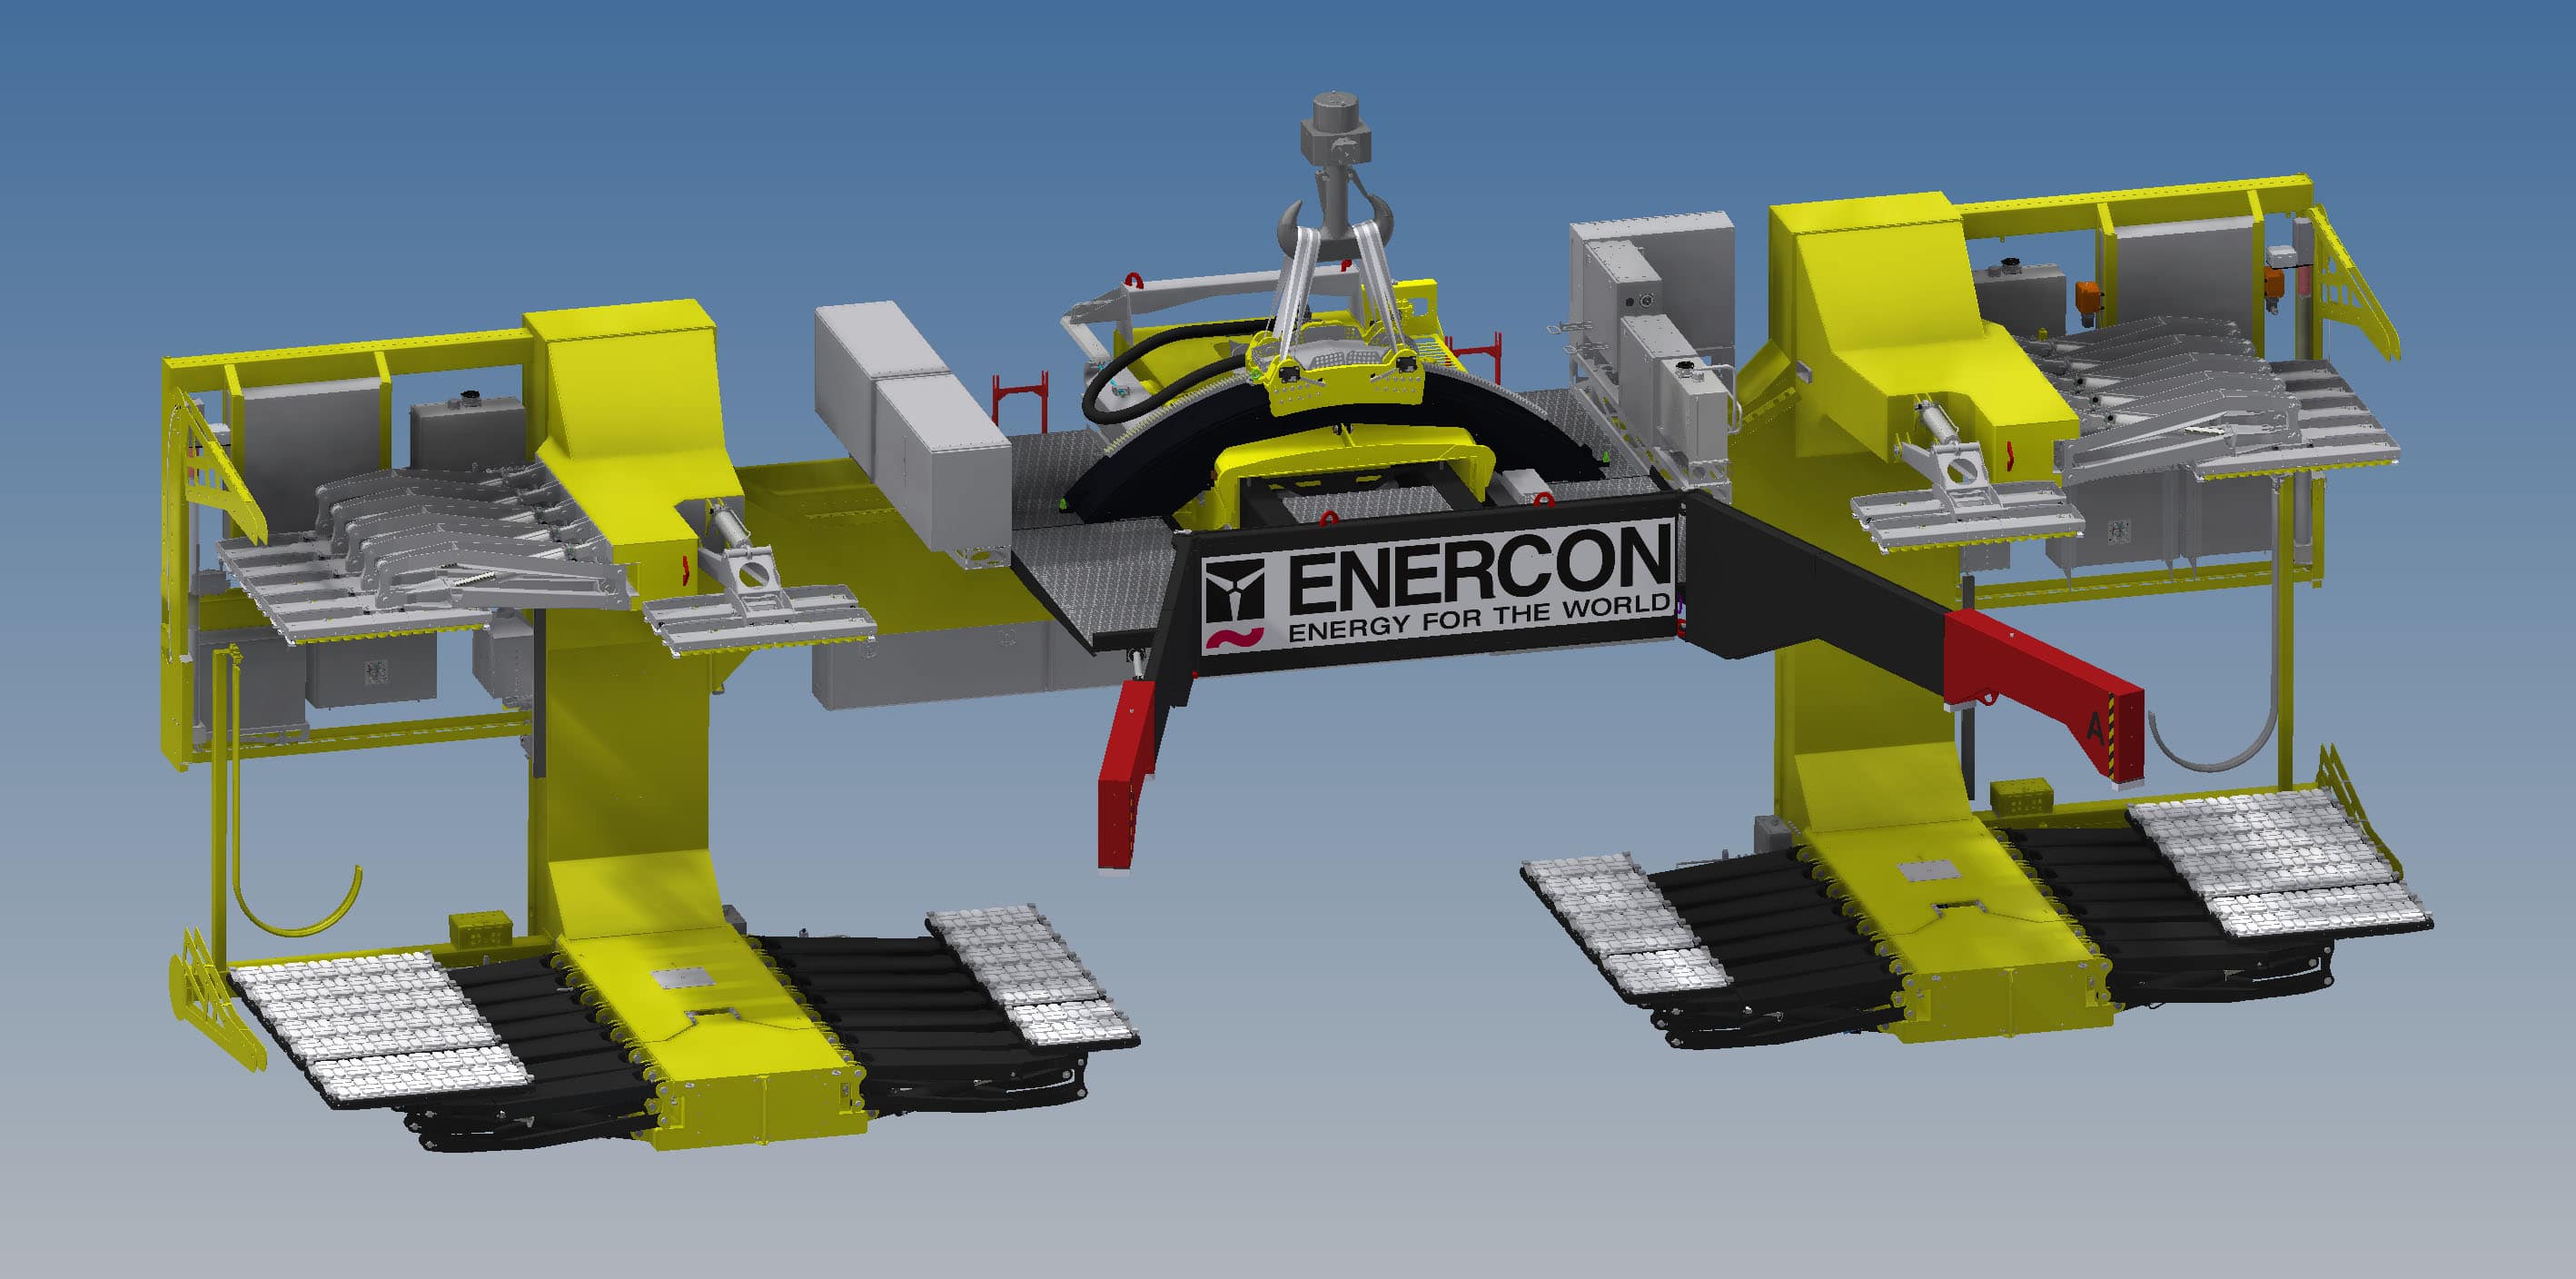 ematec is developing for Enercon the world's first rotor blade yoke that can handle blades weighing up to 50 tons. Photo: ematec